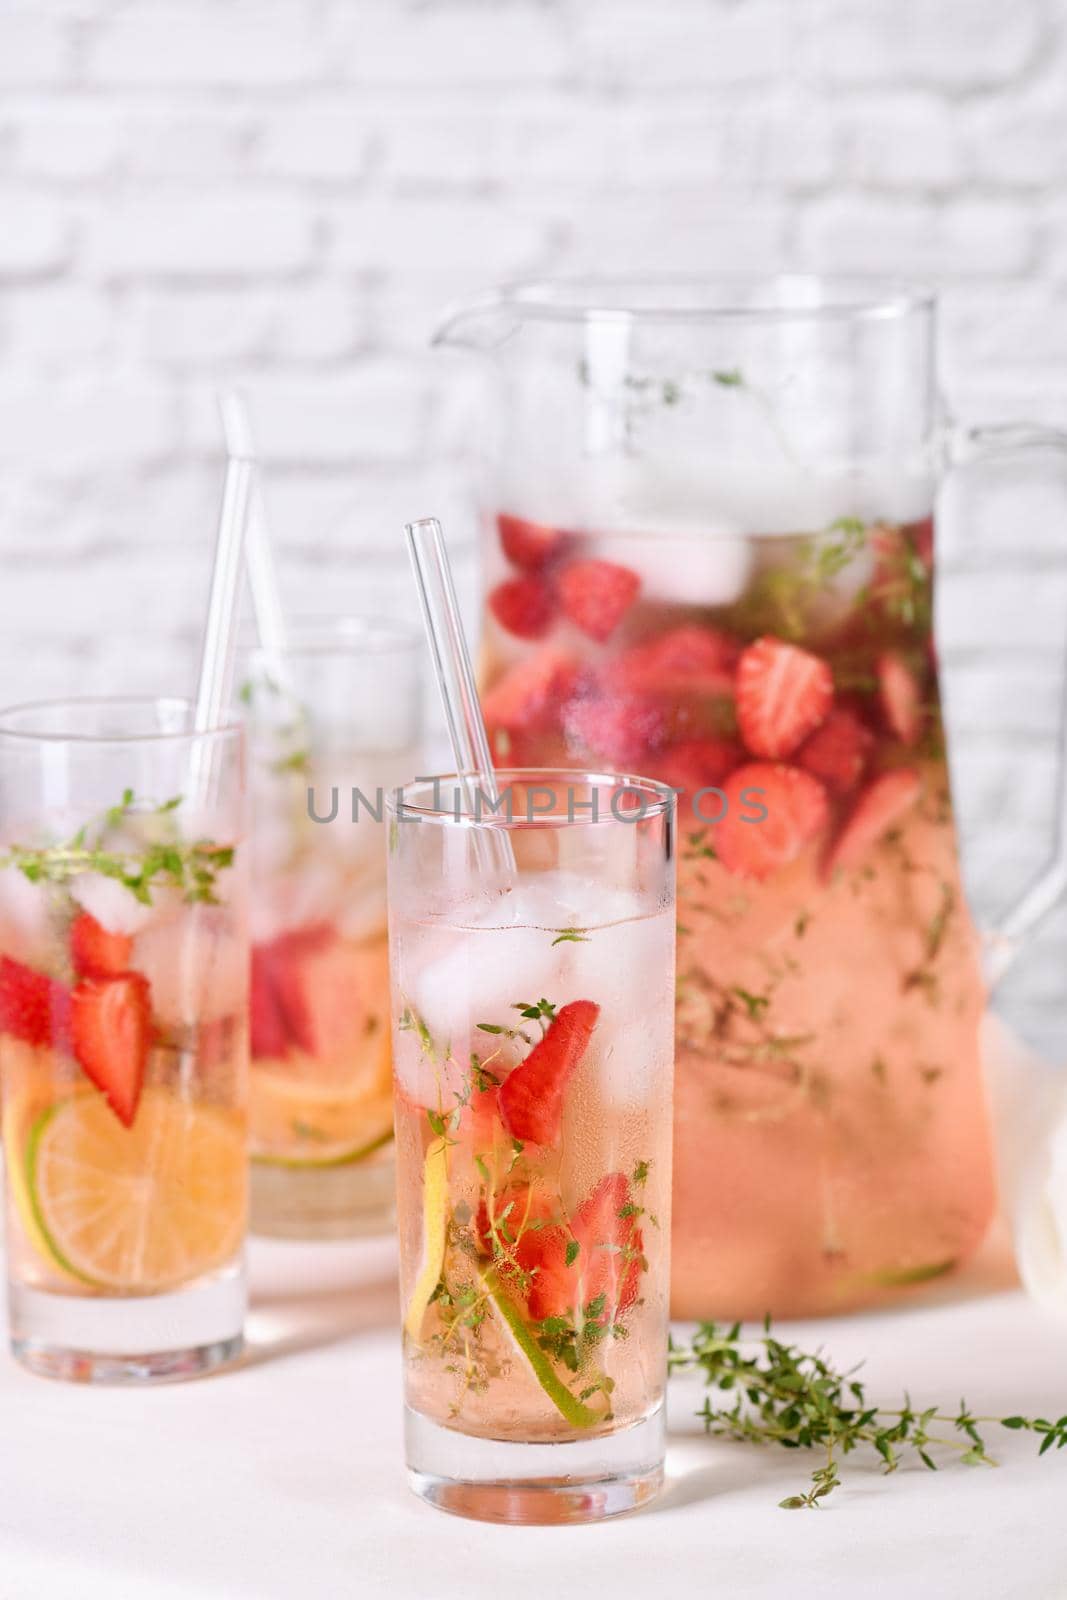 Strawberry summer cocktail with thyme by Apolonia